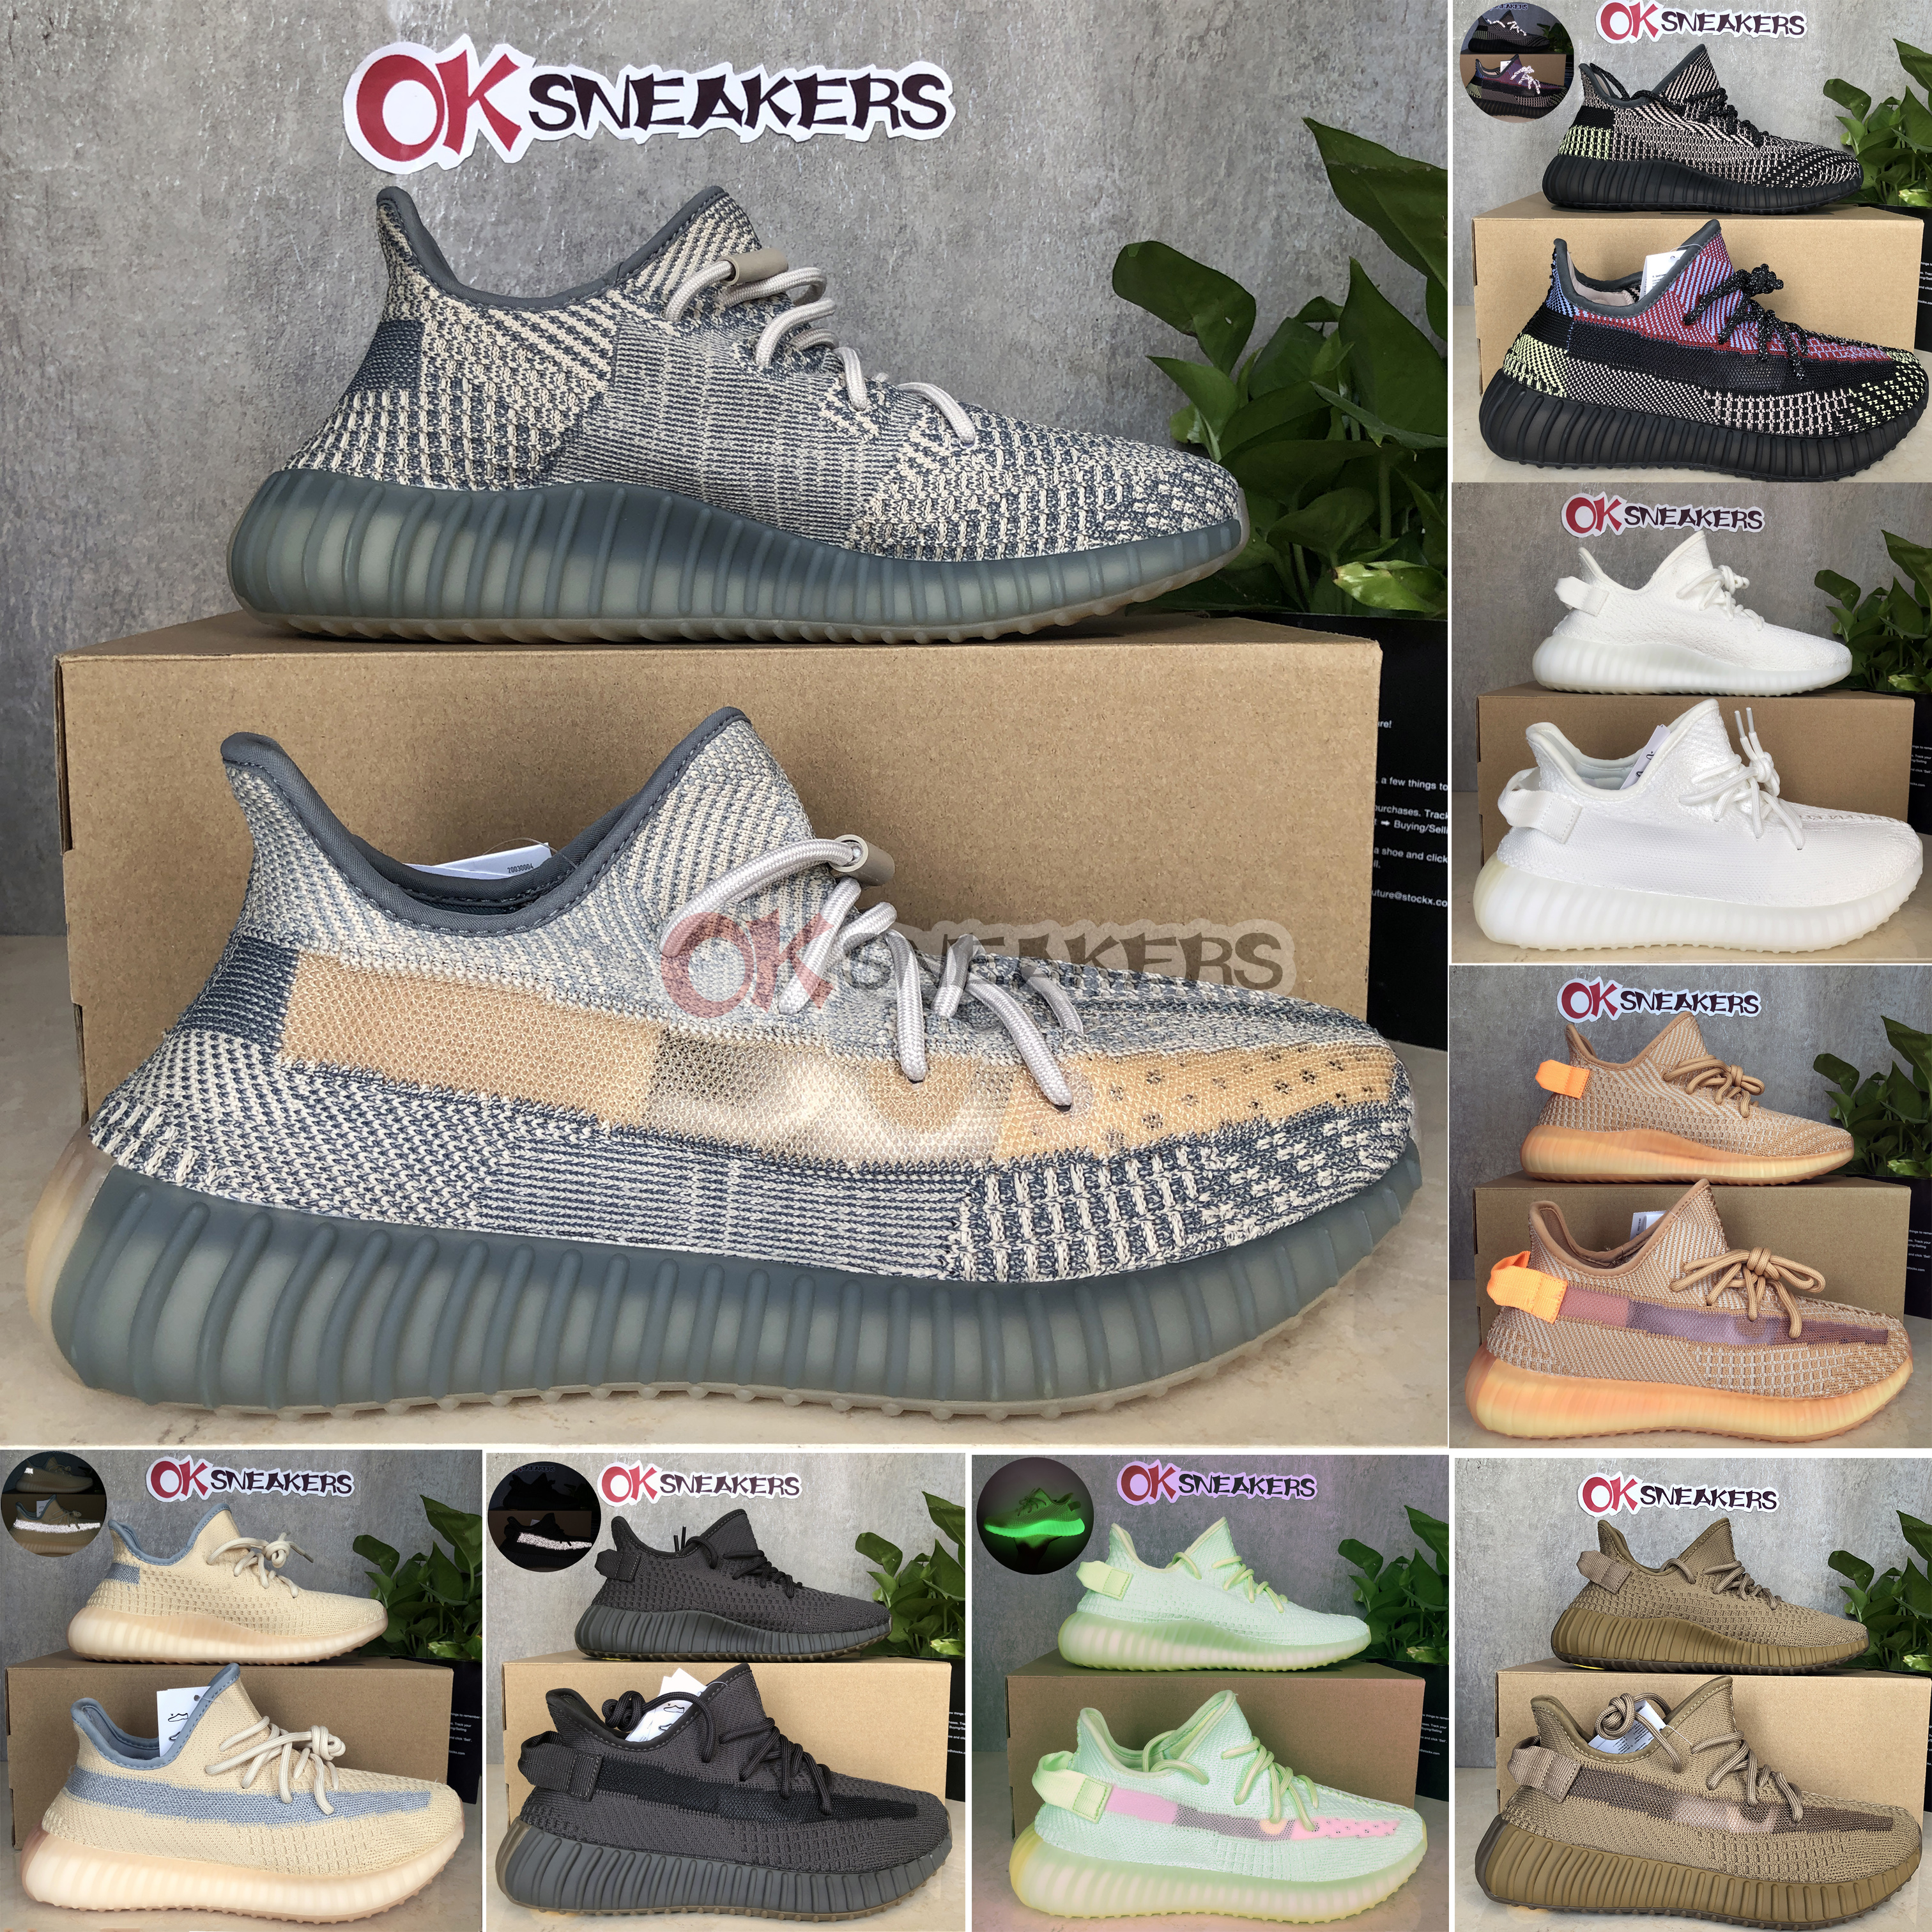 

Top quality 2021Kanye West Cinder Yecheil Bred Oreo Desert Sage Earth Linen Asriel Zebra Trainers Sneakers MenWomen Running Shoes With box, With box+bracelet+sosks+receipt+keychain